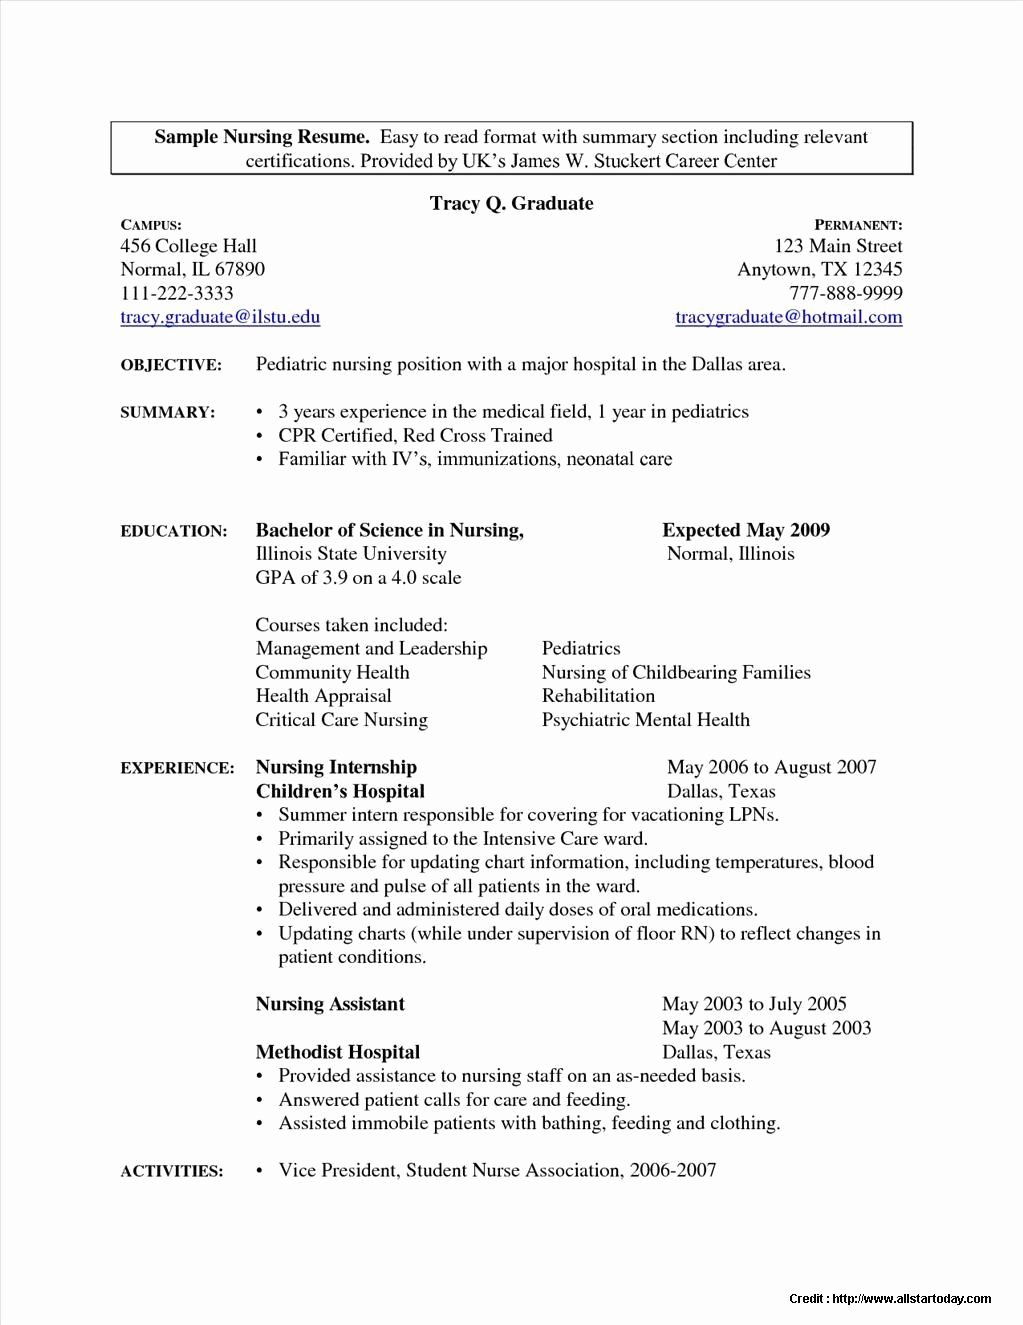 Medical assistant Resume Template Luxury Sample Resumes for Medical assistant Students Resume